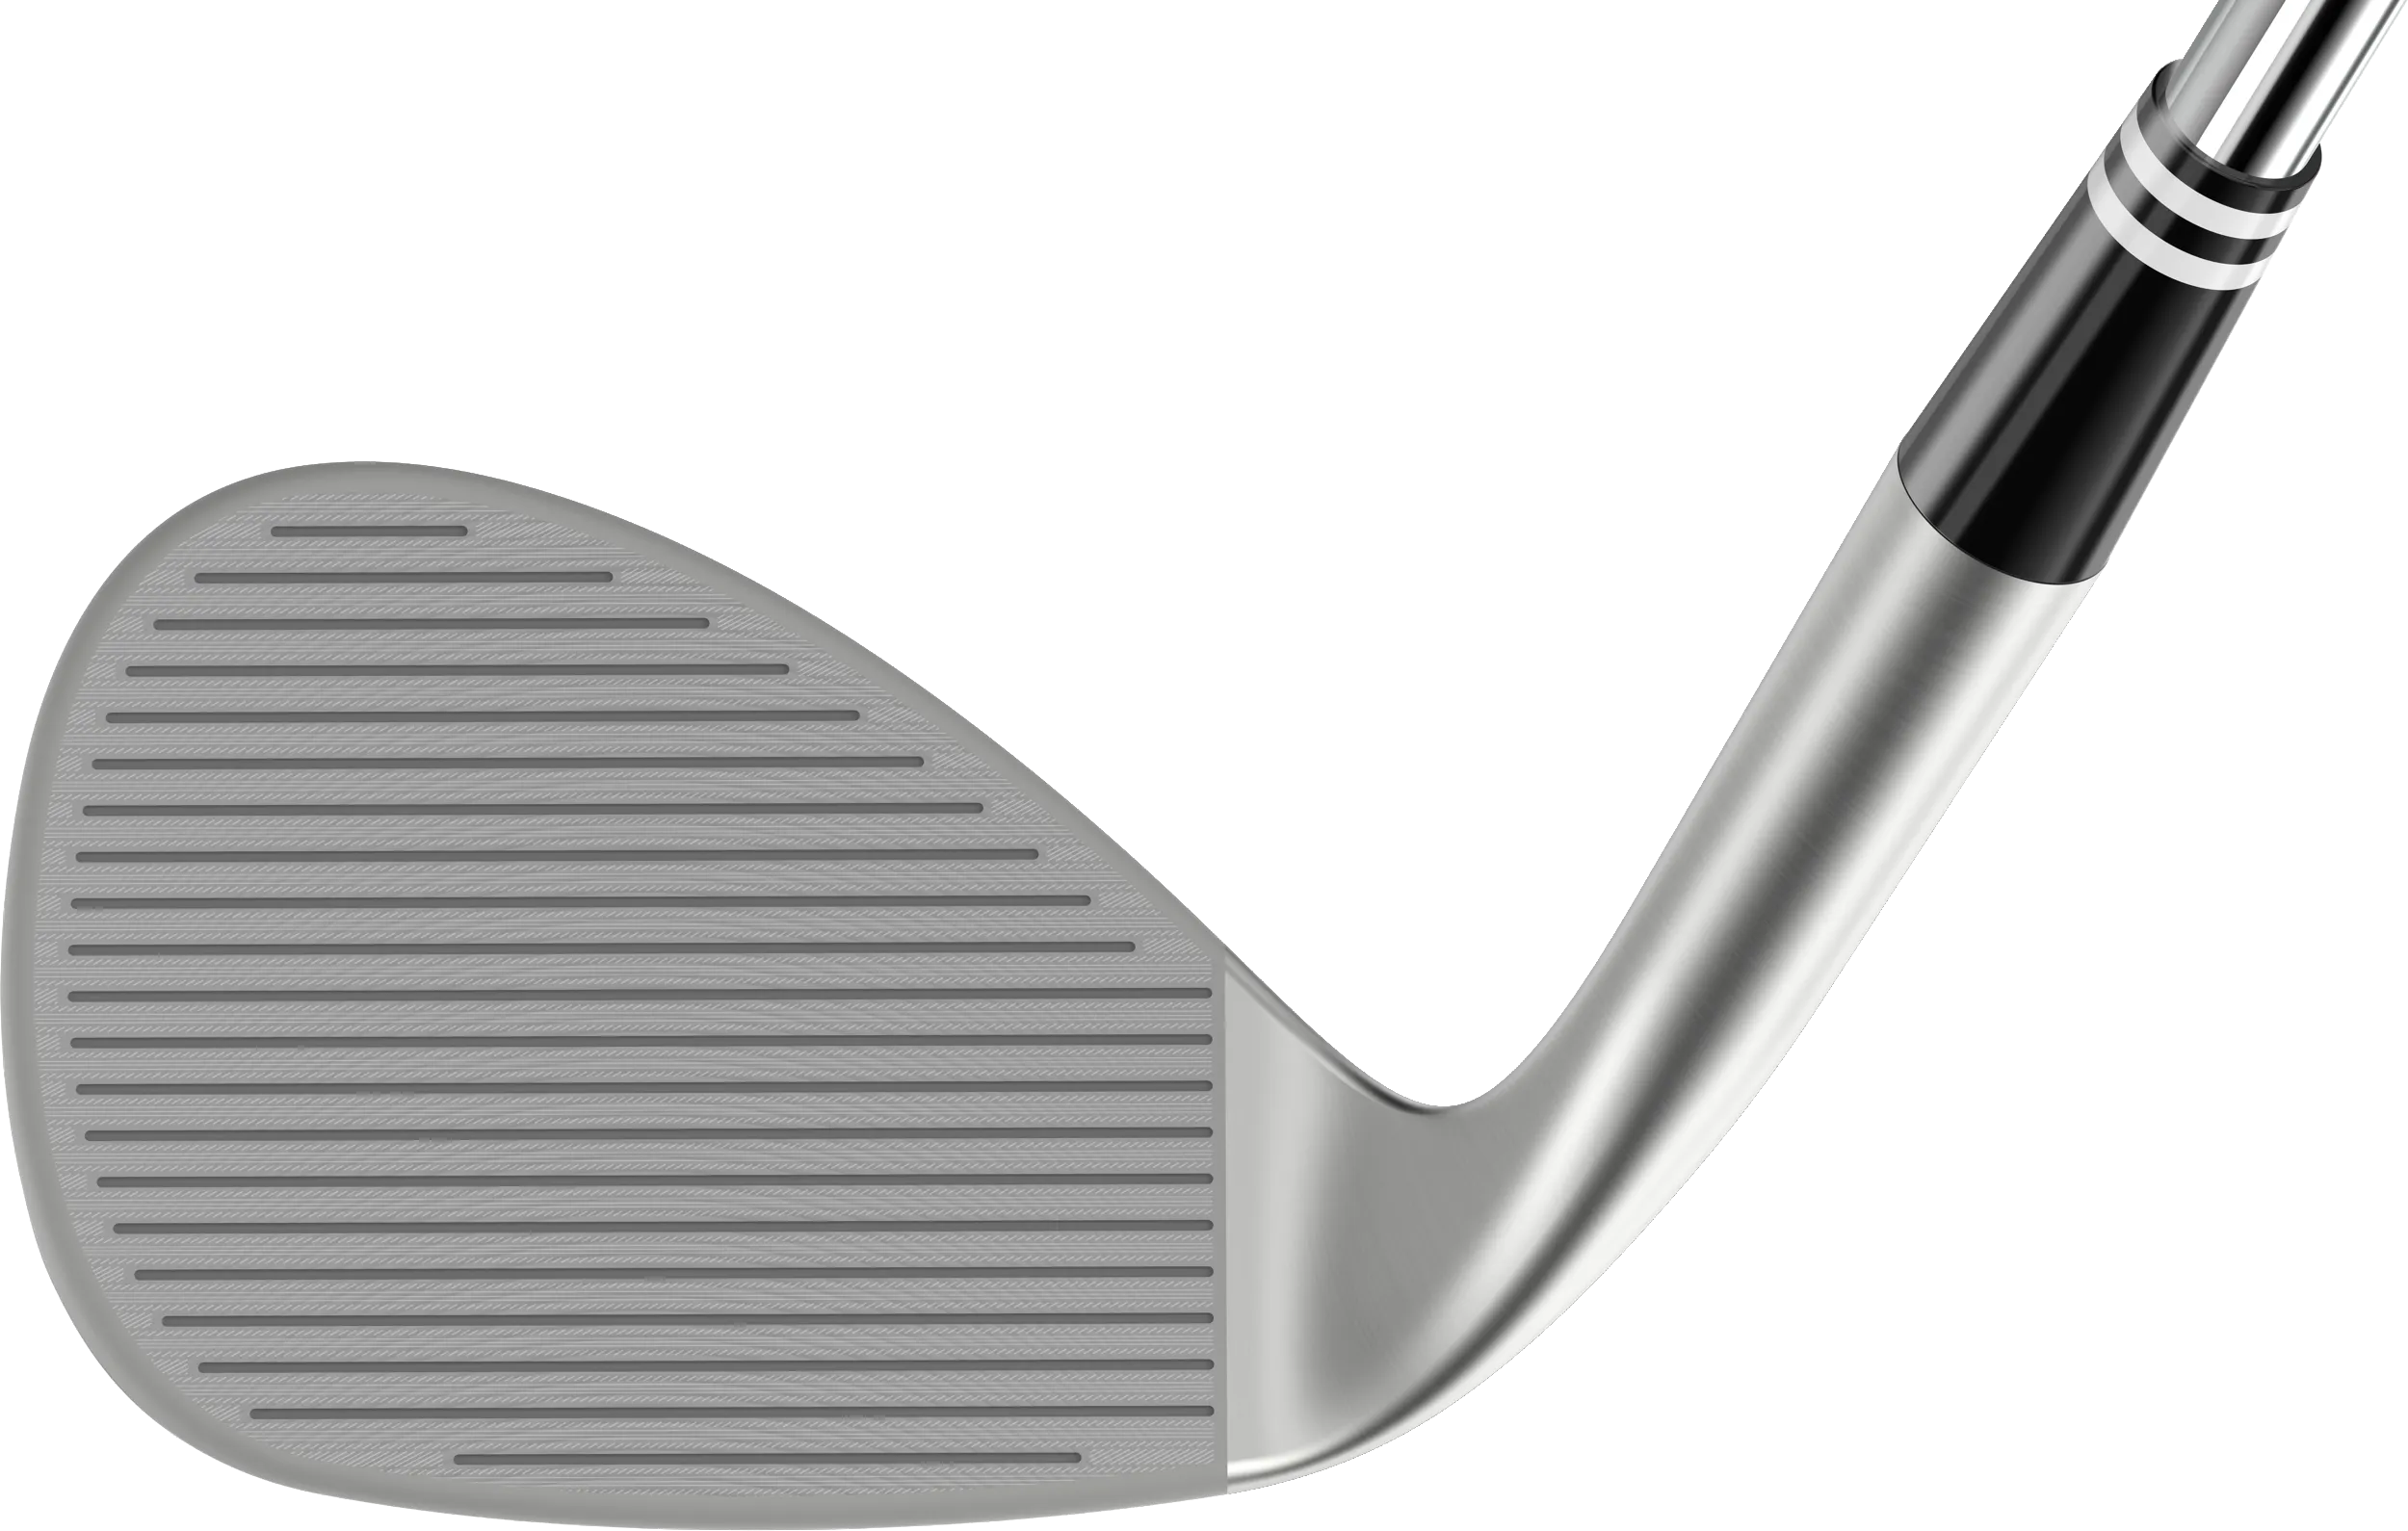 Cleveland RTX Full-Face 2 Tour Rack Wedge